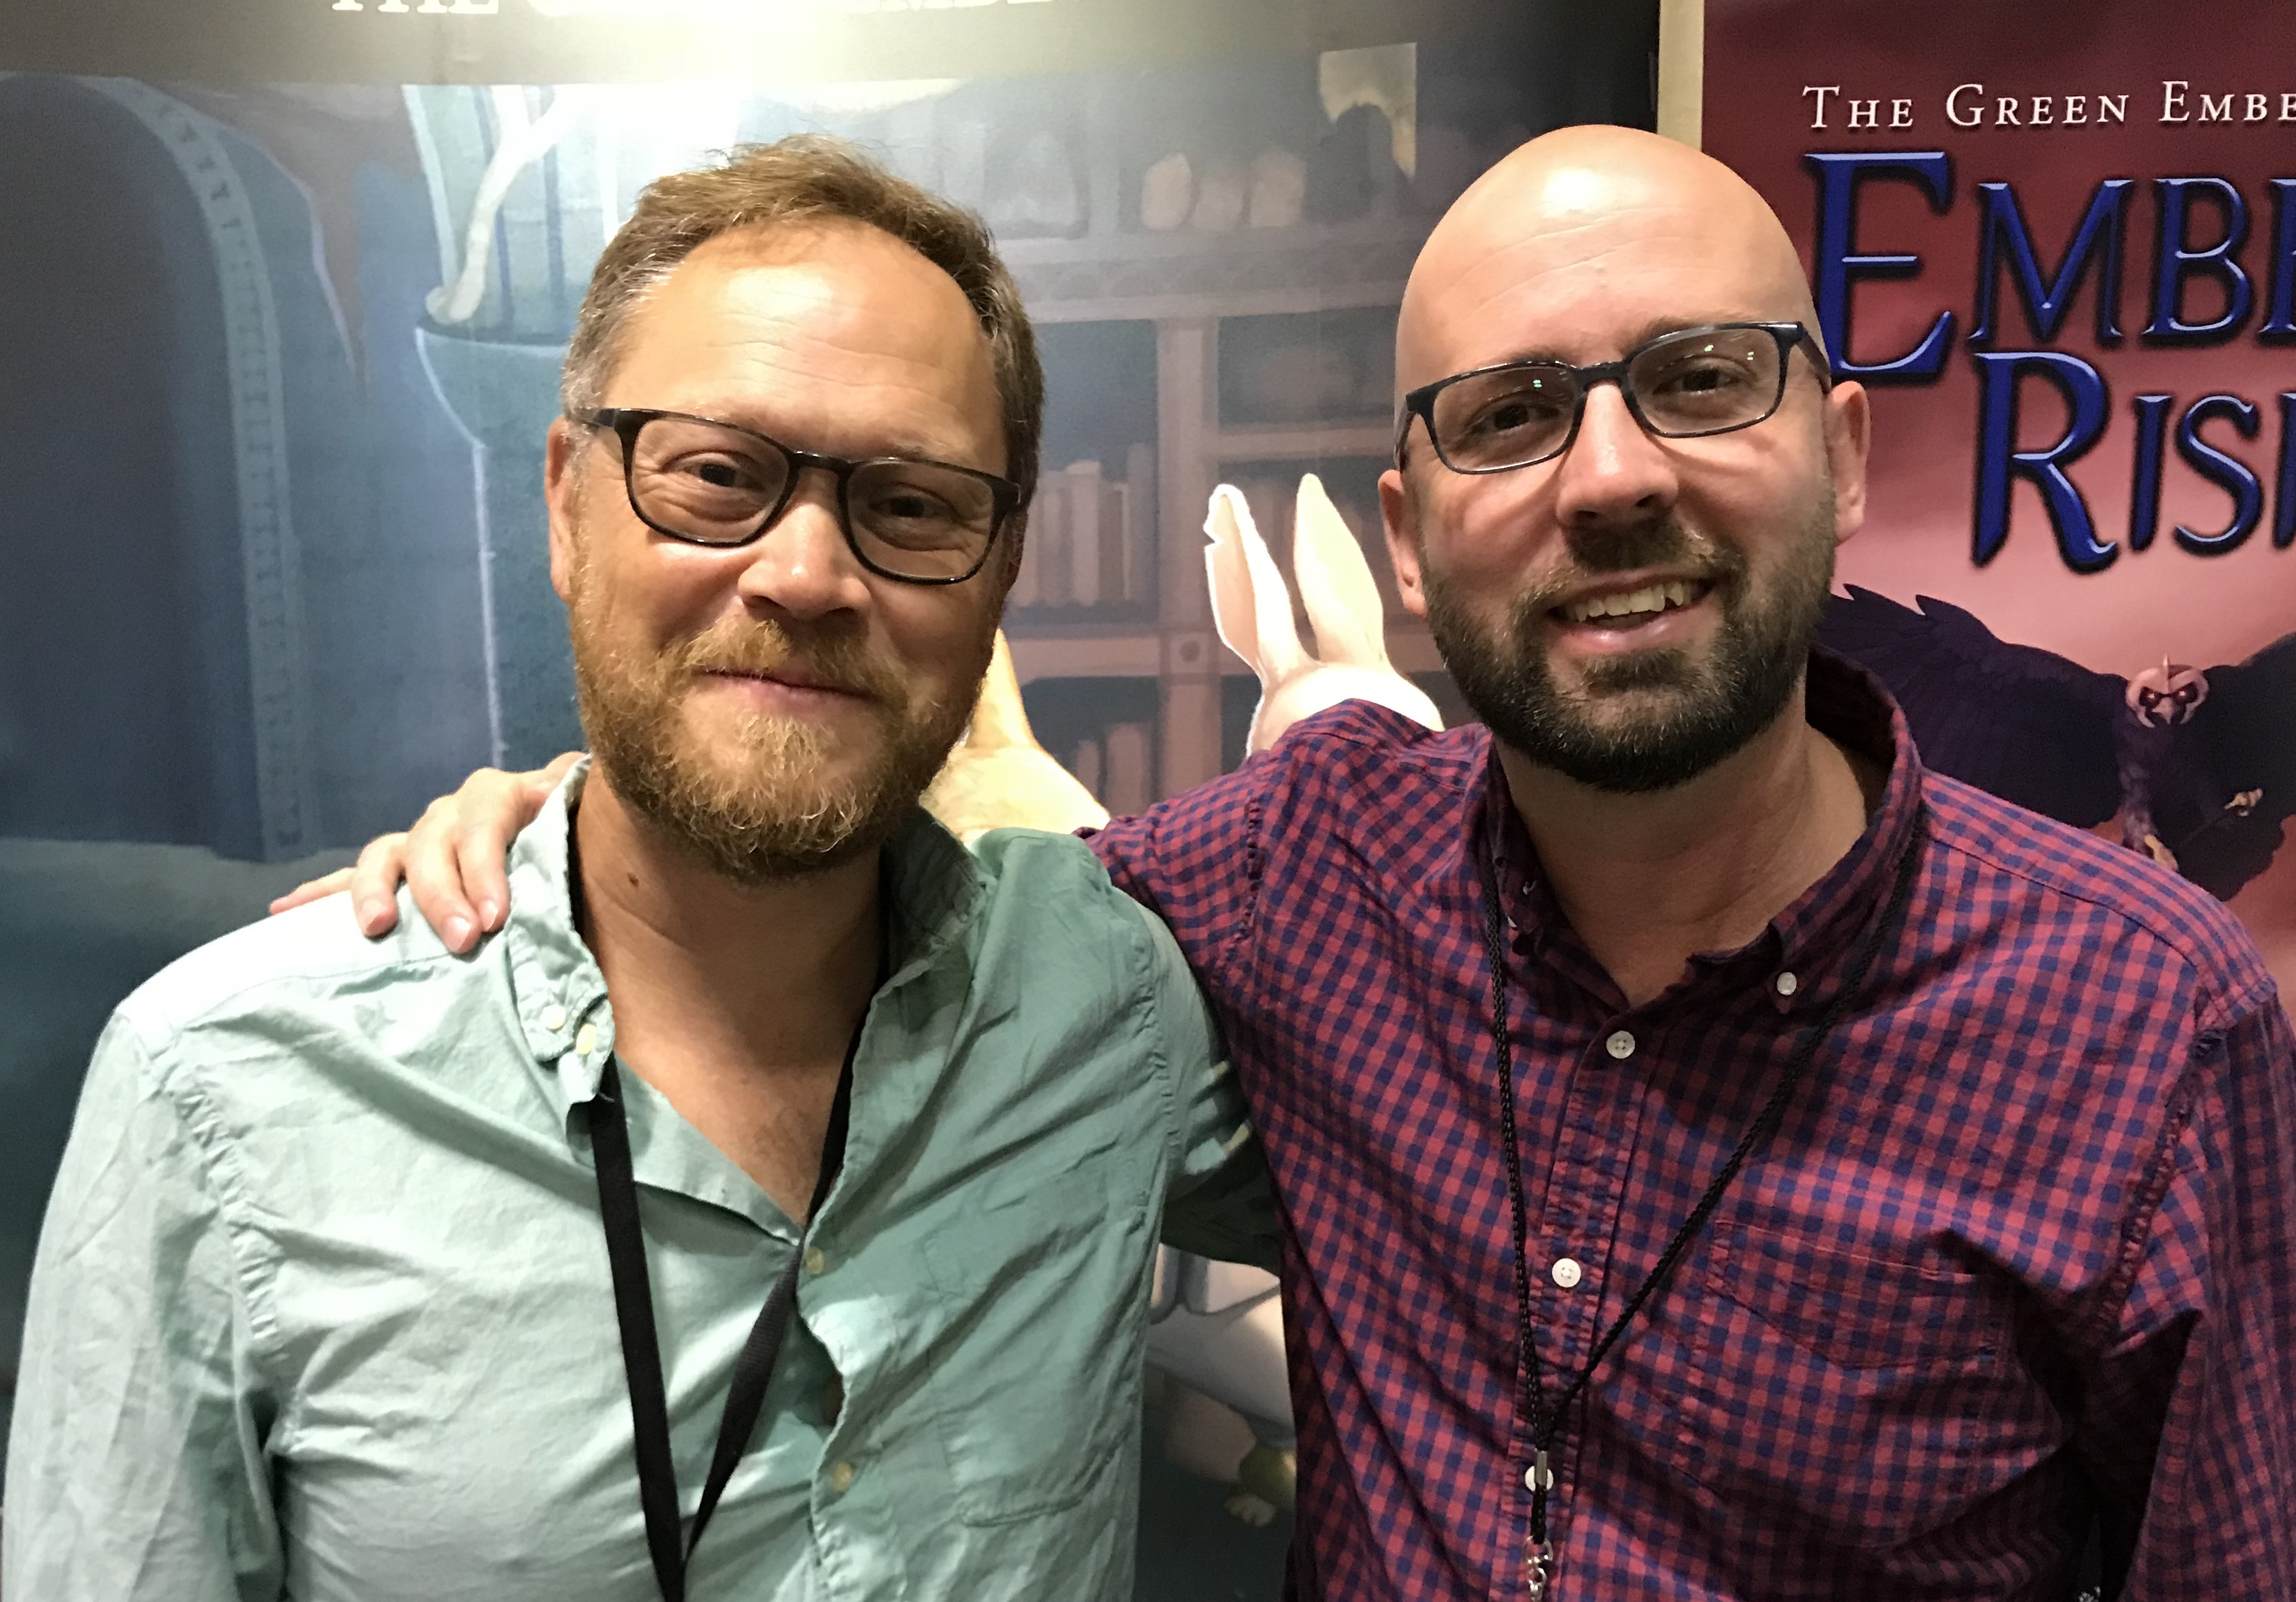 Andrew Peterson and Me and You–THIS WEEK!